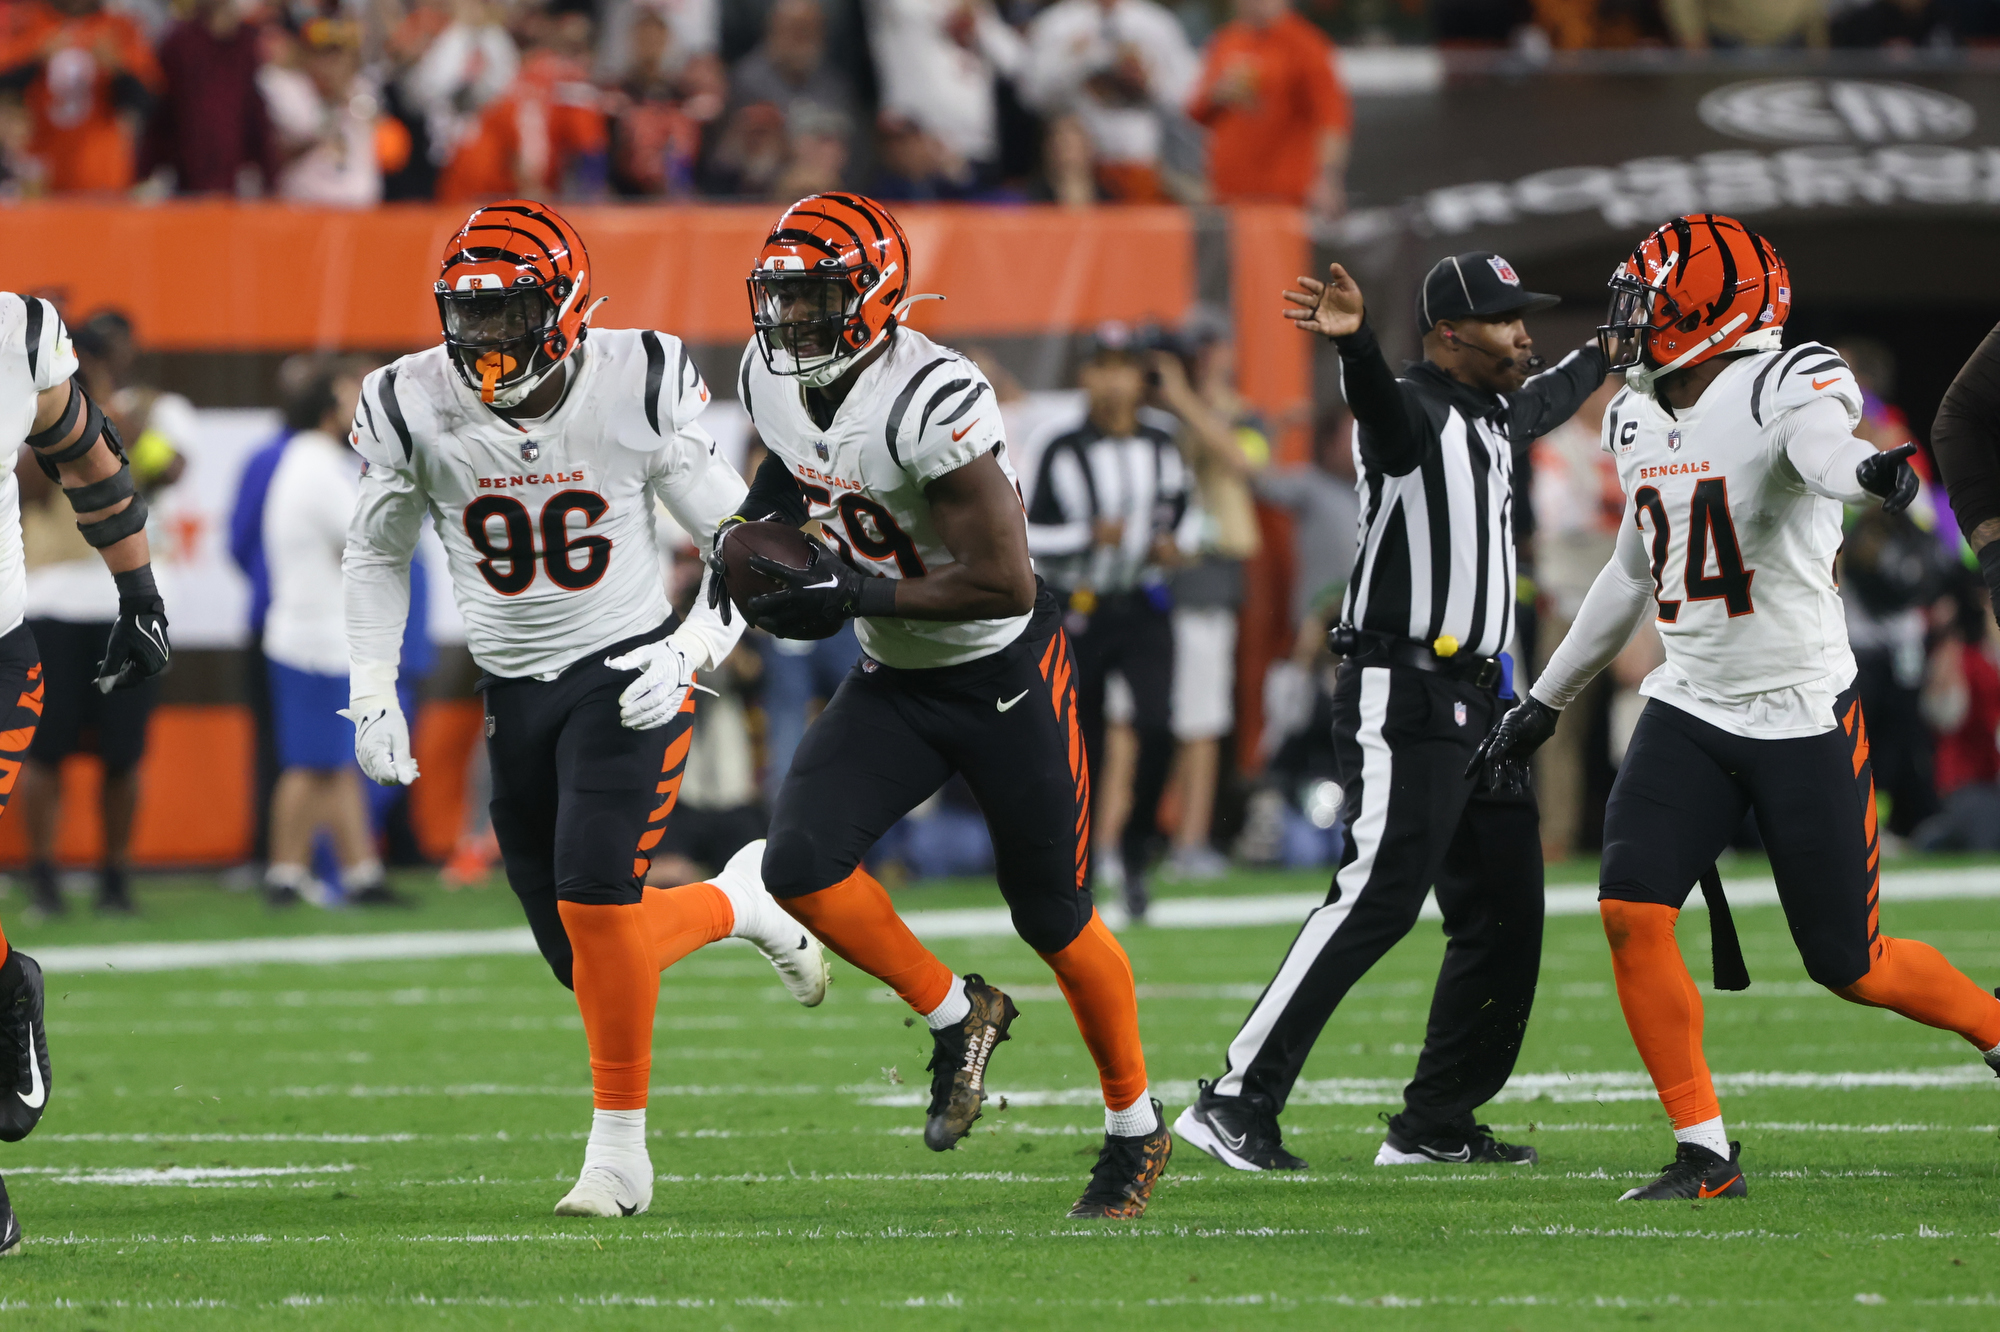 Cincinnati Bengals vs. Baltimore Ravens: How to watch NFL Wild Card playoff  game for free (1/15/23) 